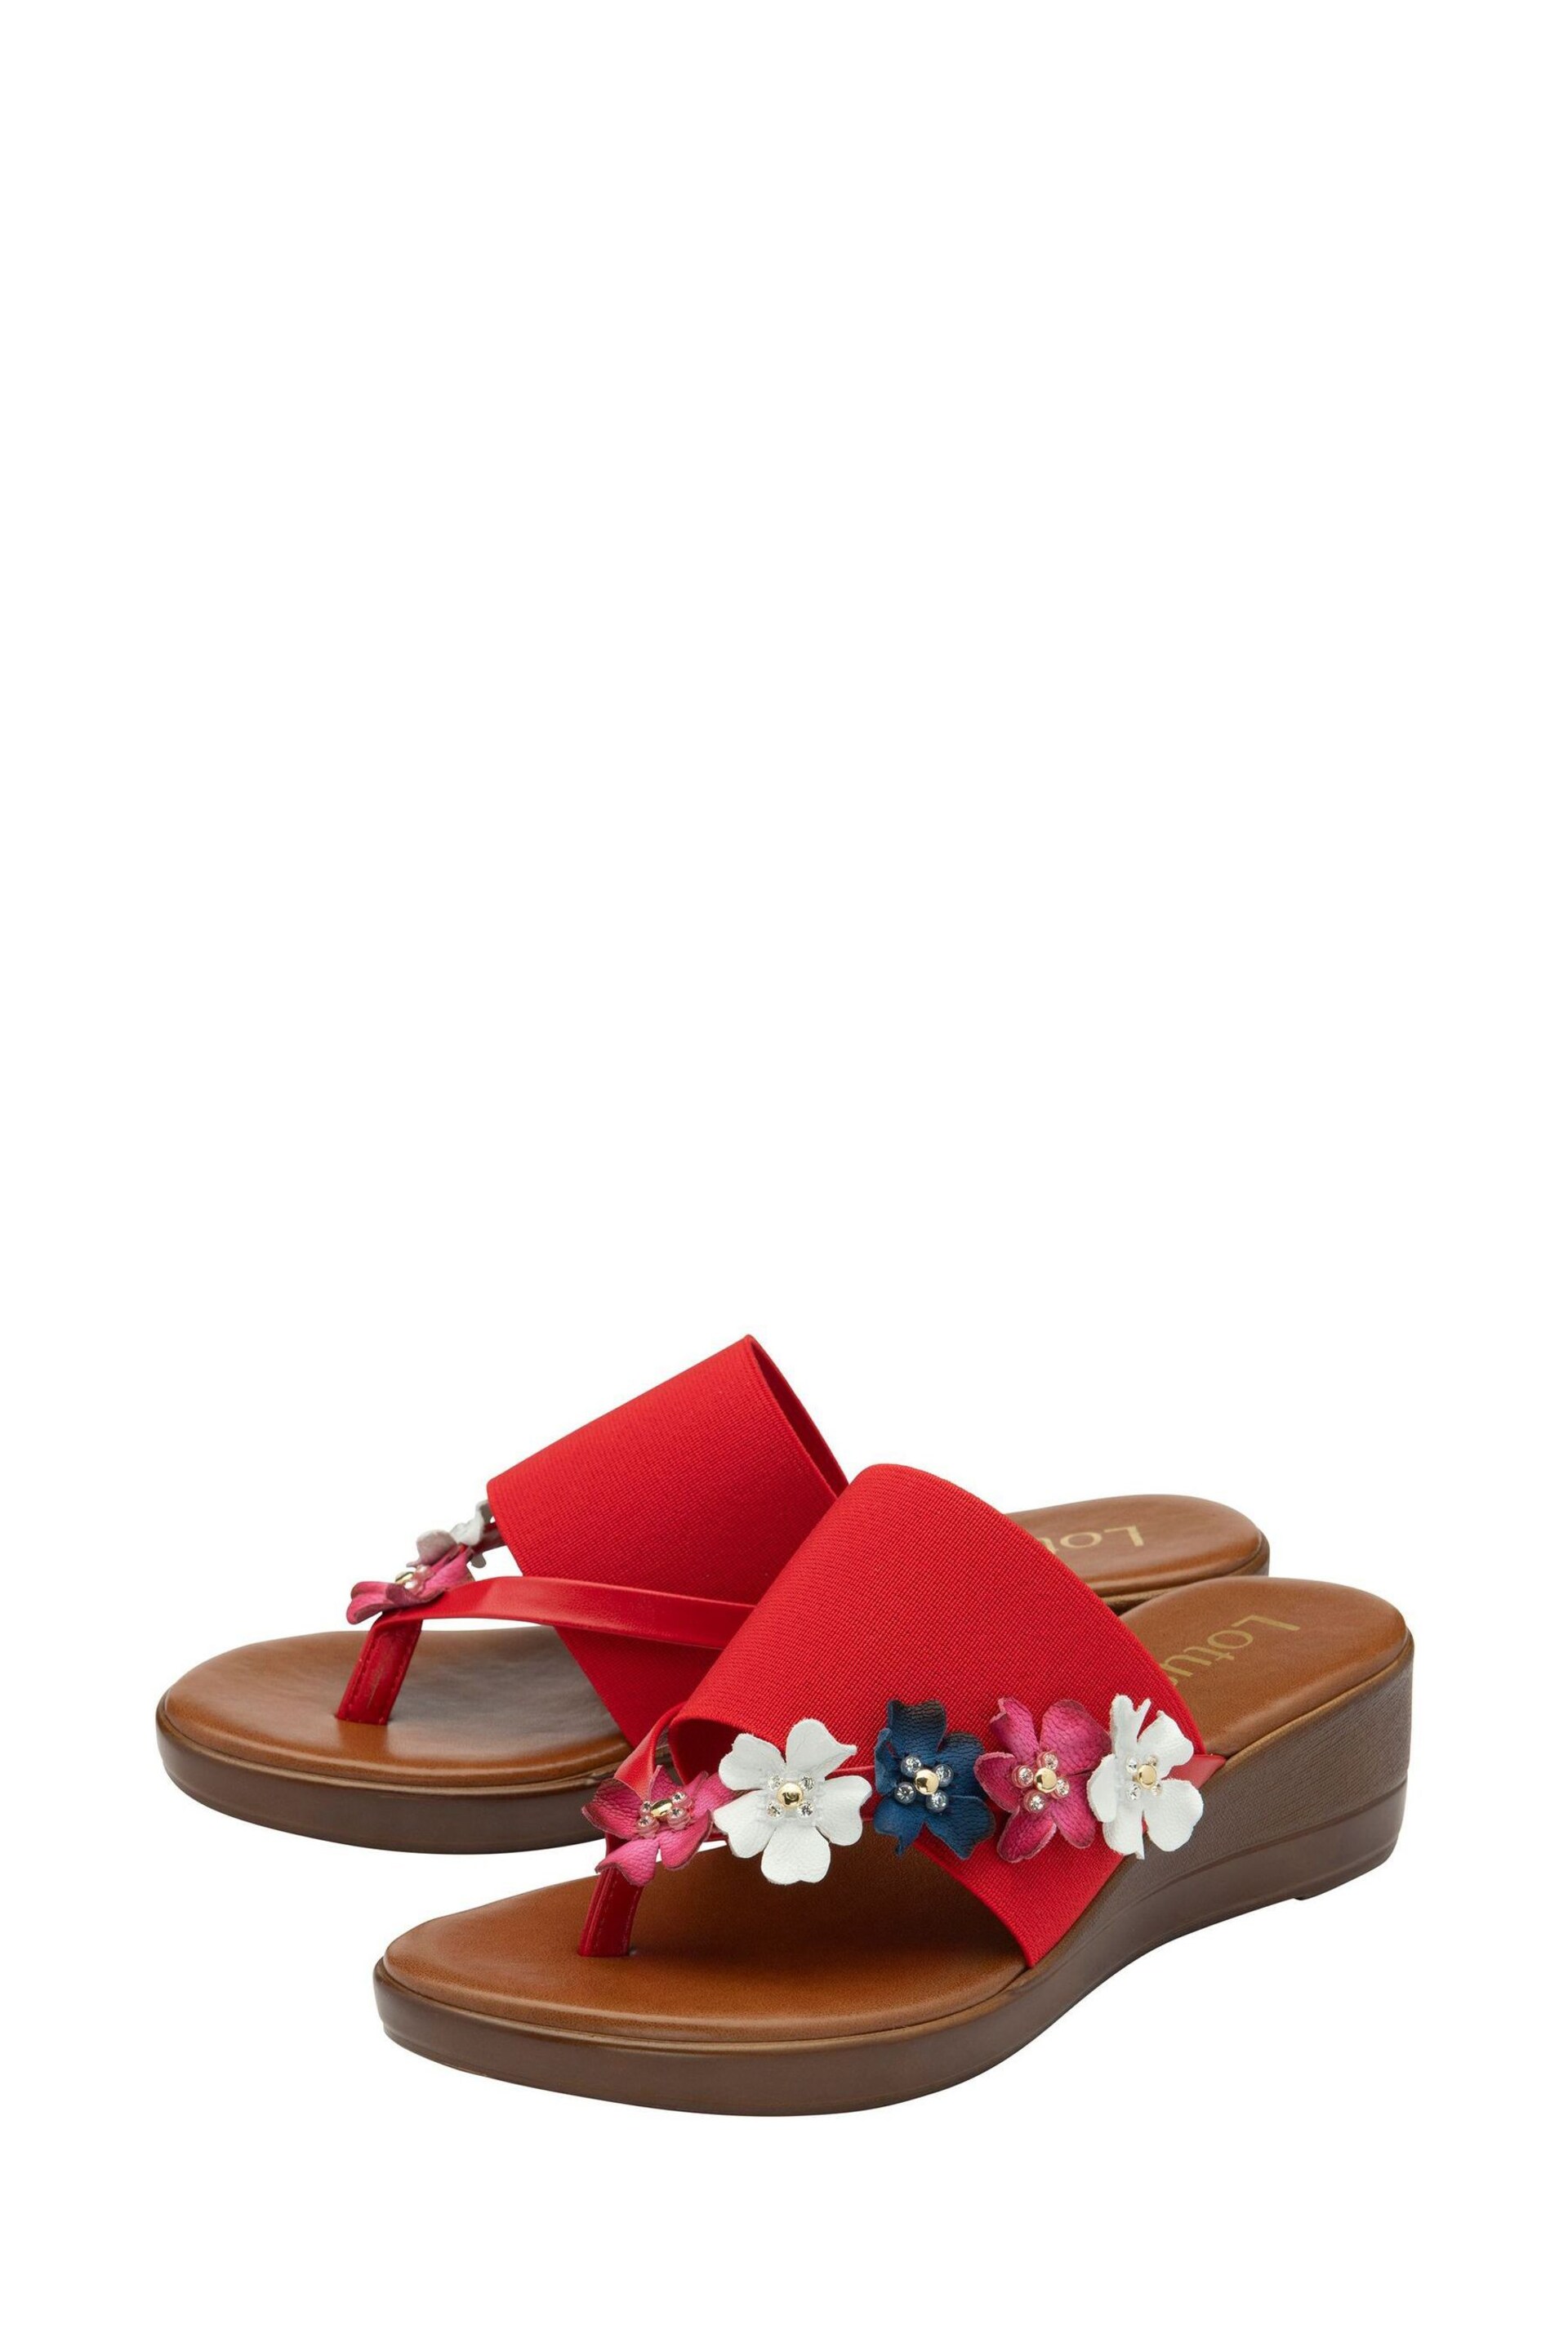 Lotus Red Toe-Post Wedge Sandals - Image 2 of 4